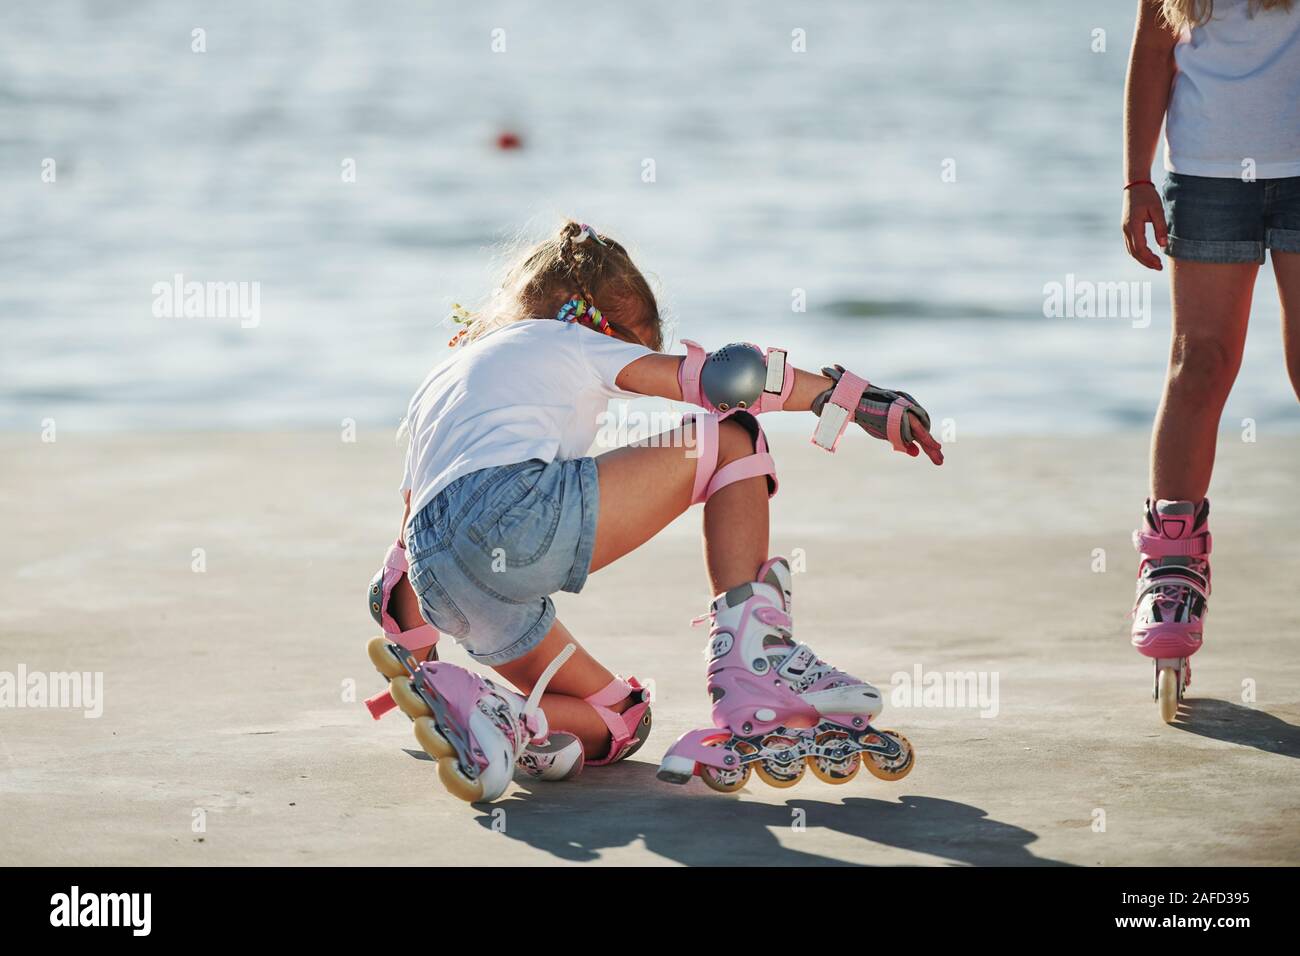 Two kids learning how to ride on roller skates at daytime near the lake Stock Photo